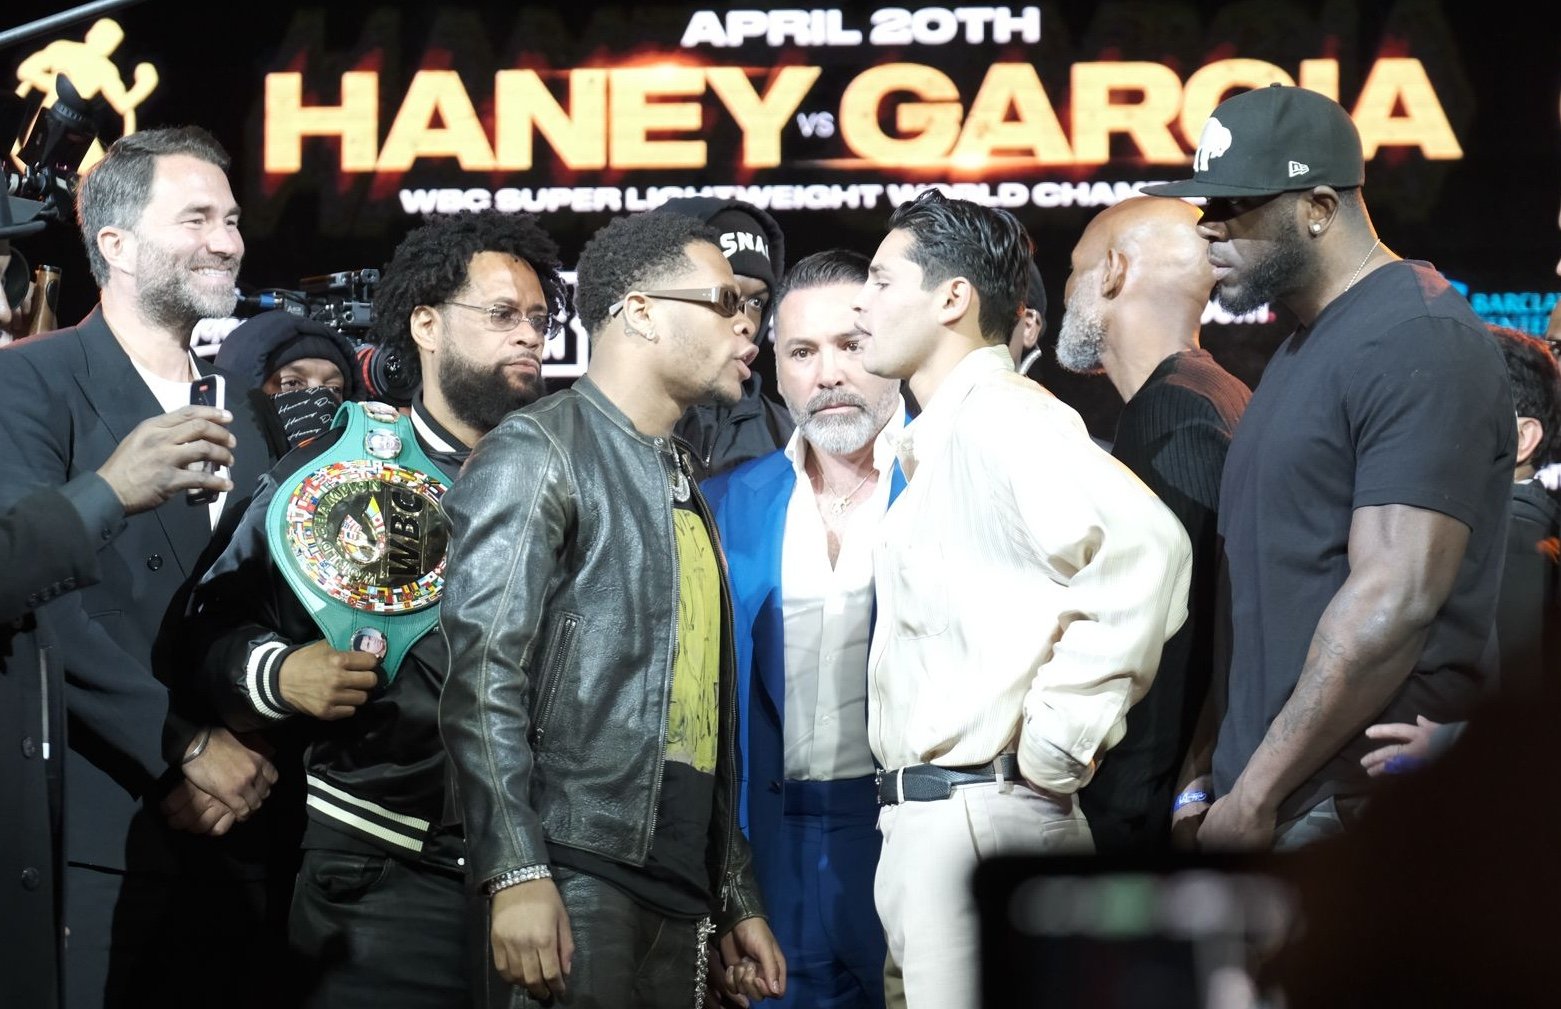 Haney-Garcia, New York's super-fight comeback, remains in NYC - The Ring